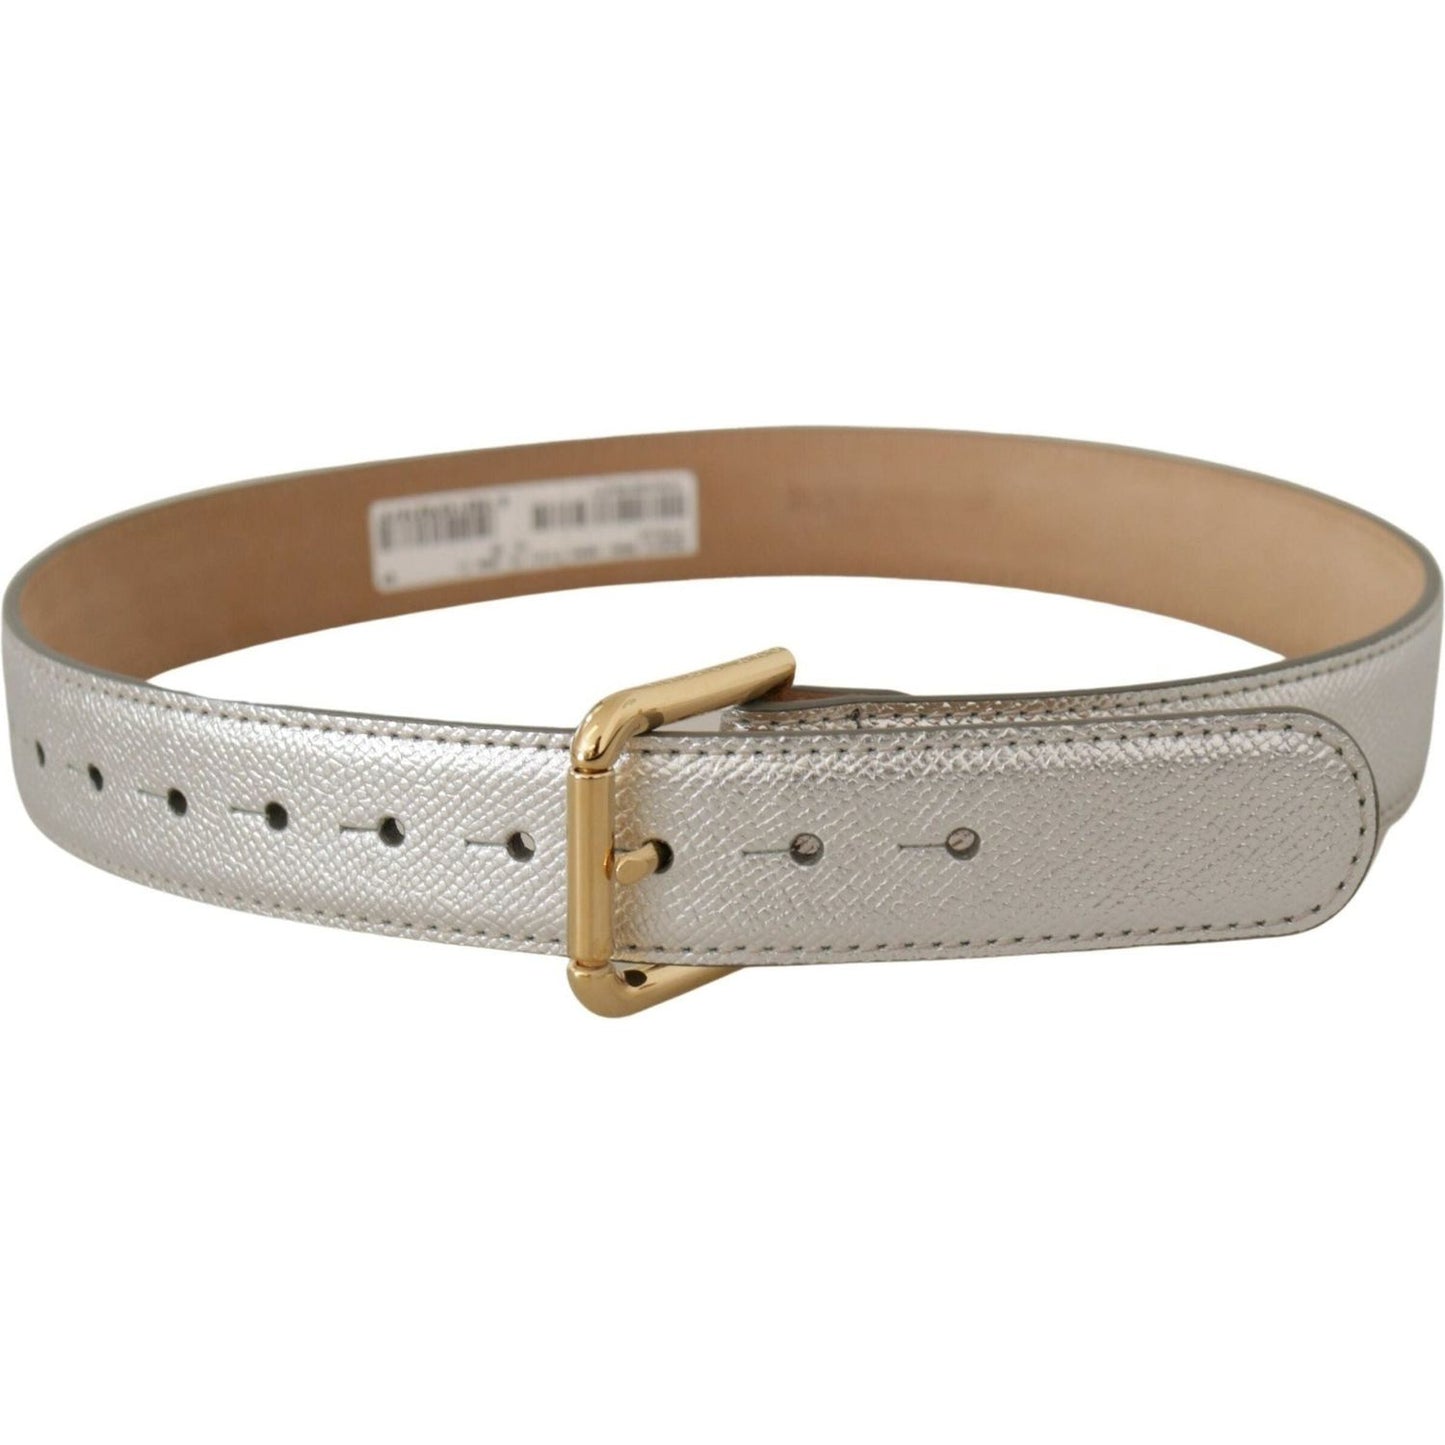 Dolce & Gabbana Elegant Silver Leather Belt with Engraved Buckle silver-leather-gold-tone-logo-metal-waist-buckle-belt IMG_8746-scaled-cfa03e78-a0d.jpg